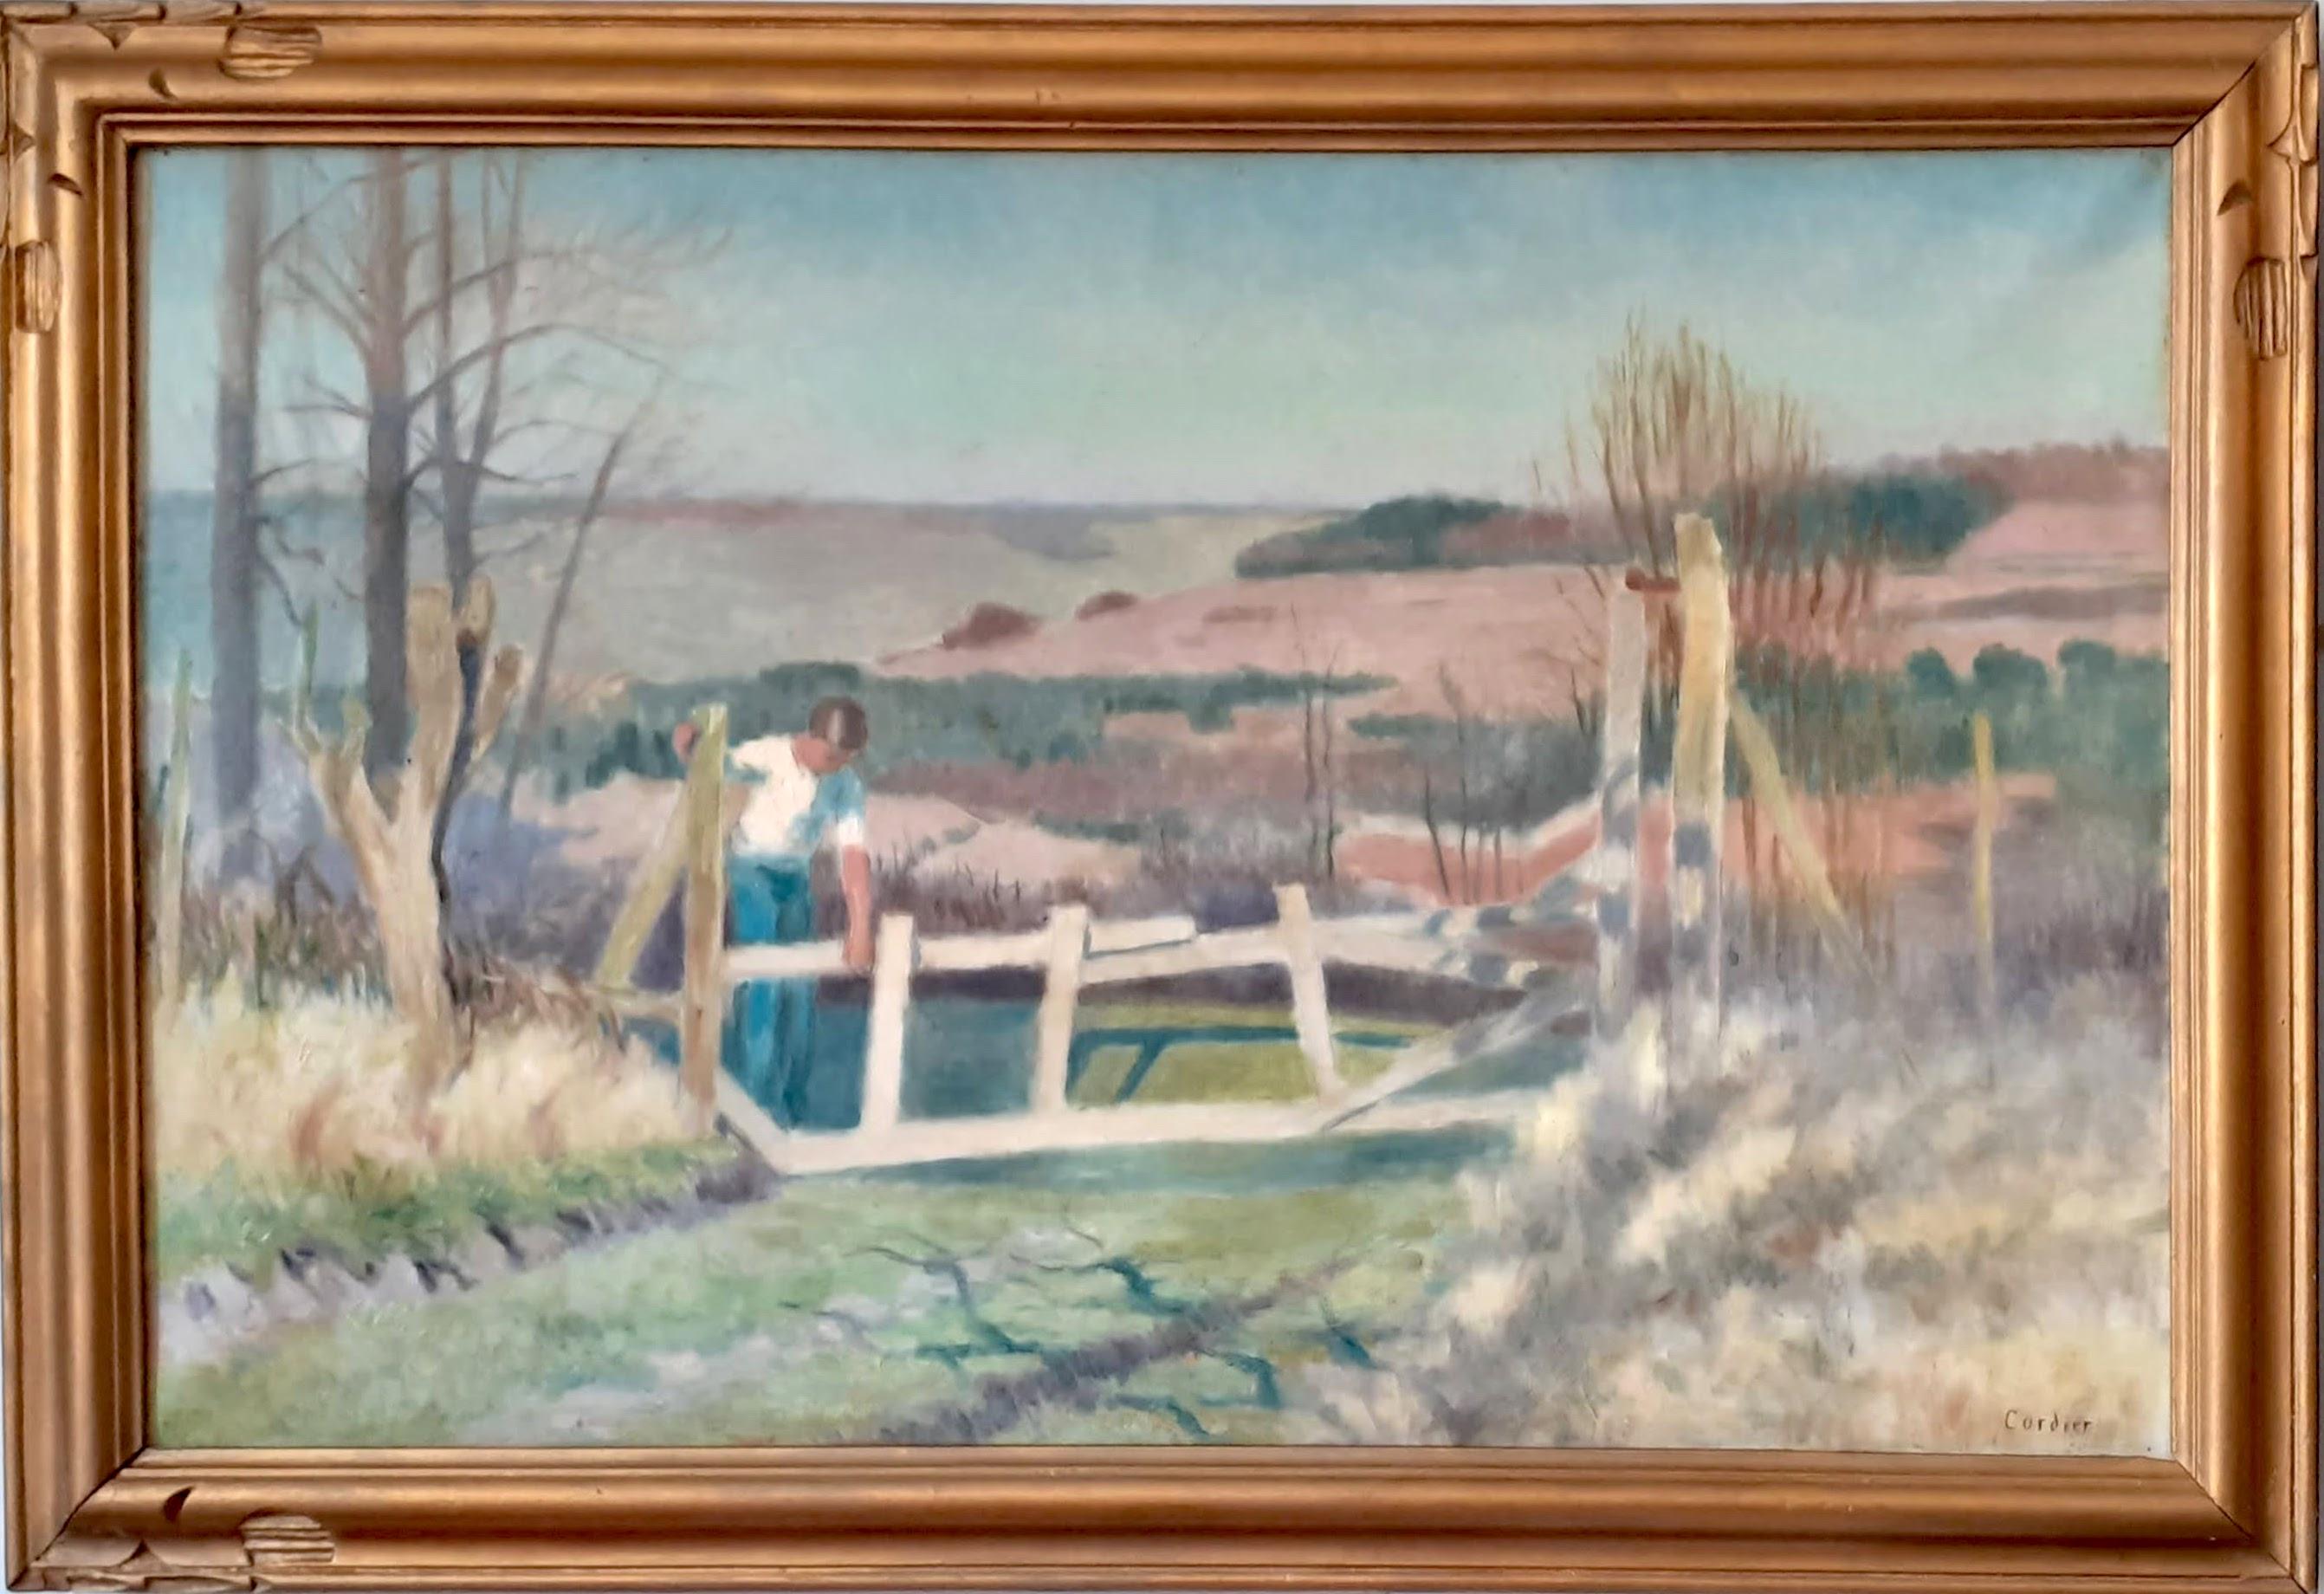 Boy in a landscape, large art deco period painting 